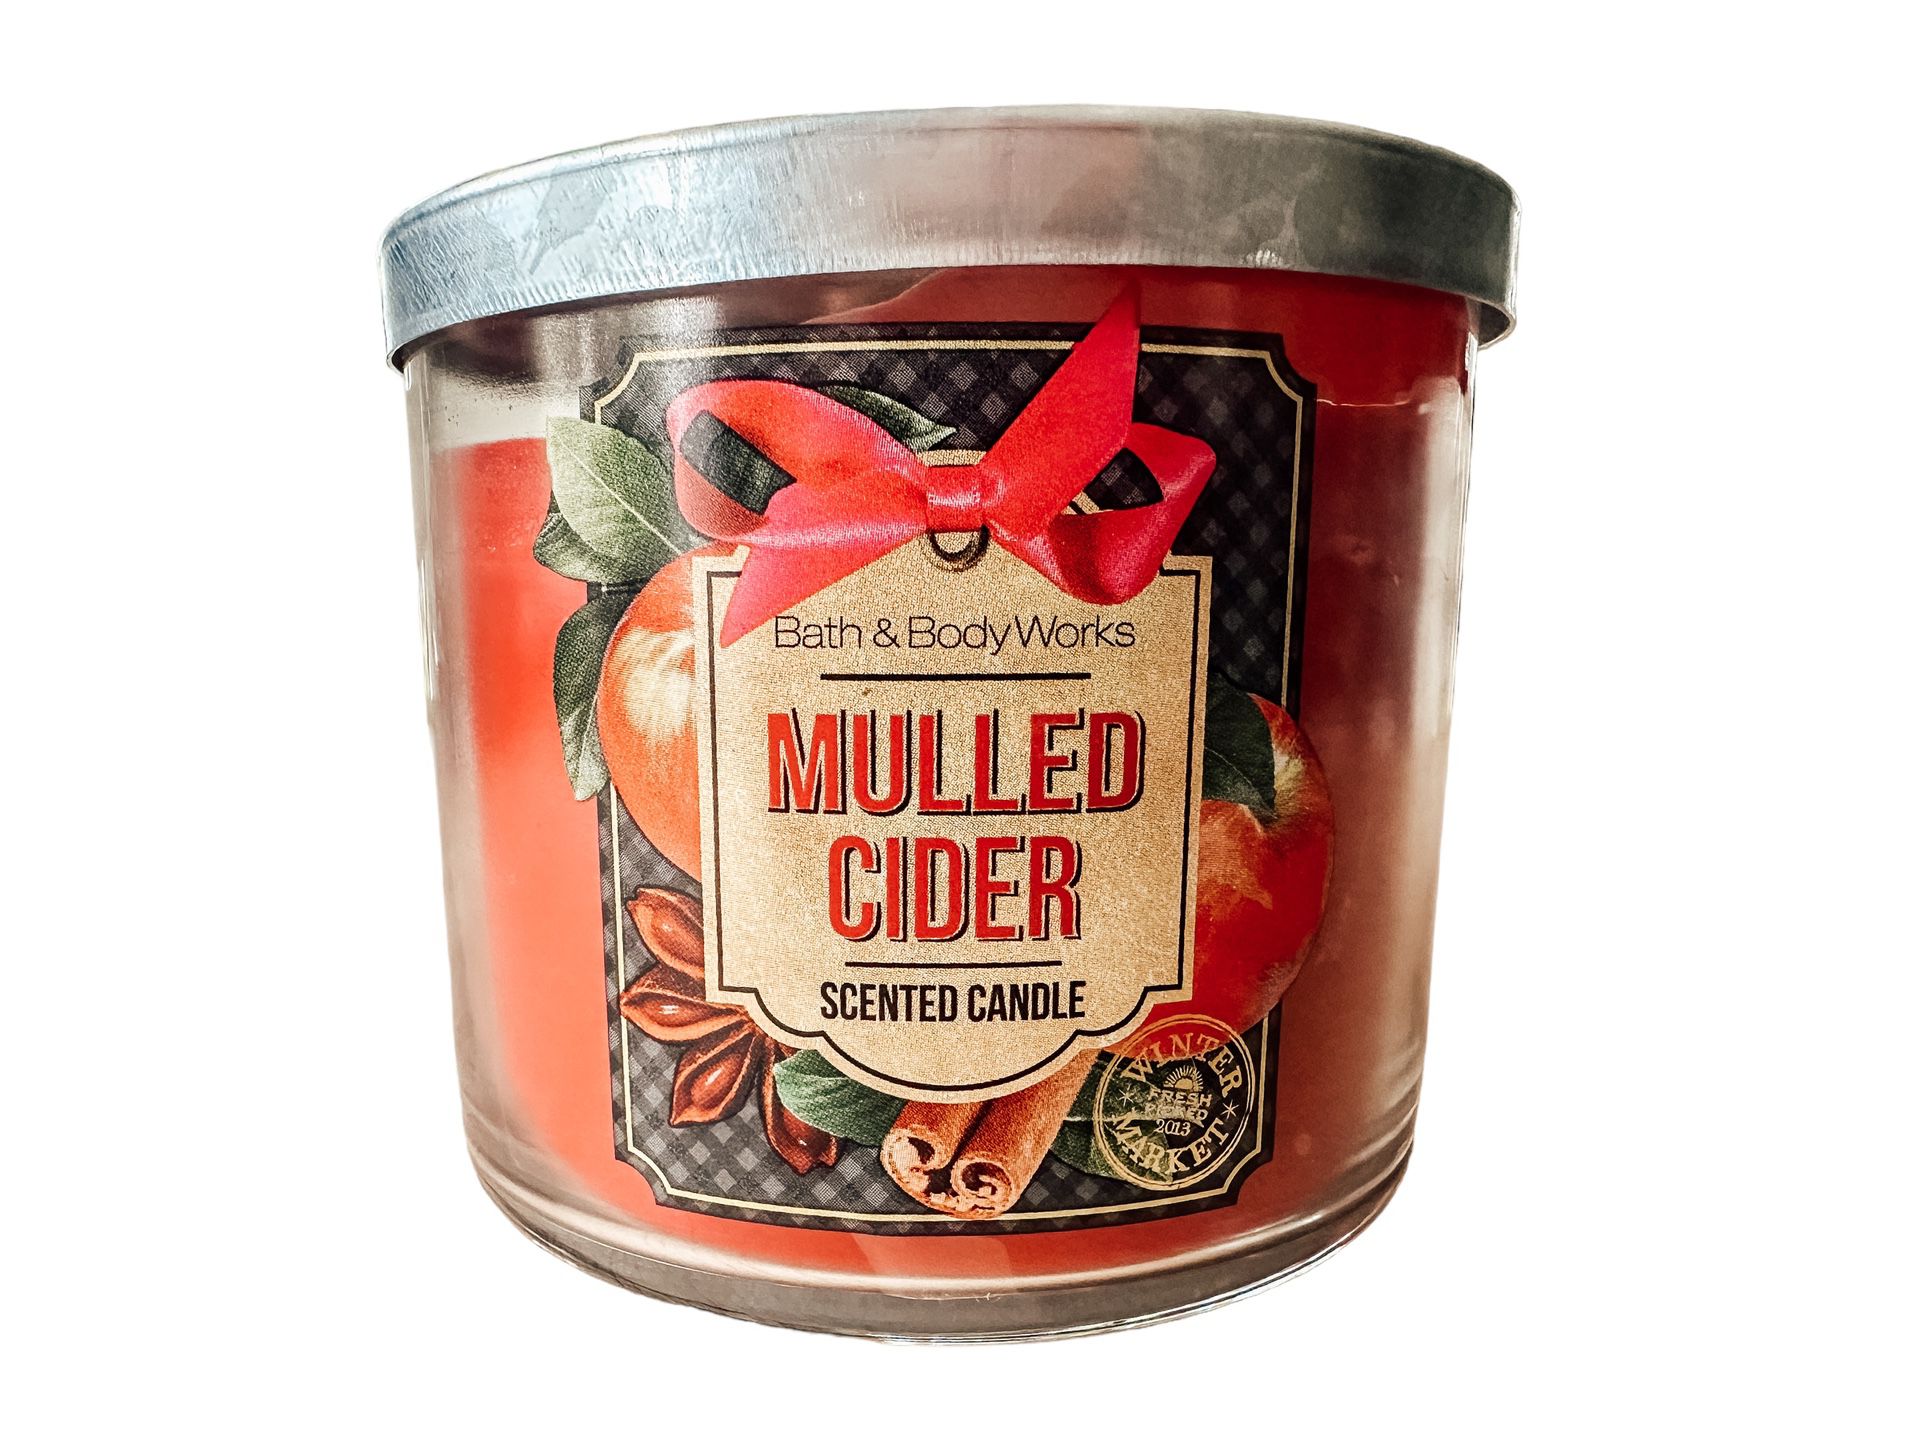 Bath Body Works MULLED CIDER Candle Glass Jar 3 Wick 80% Full Apple Fall Autumn Scented